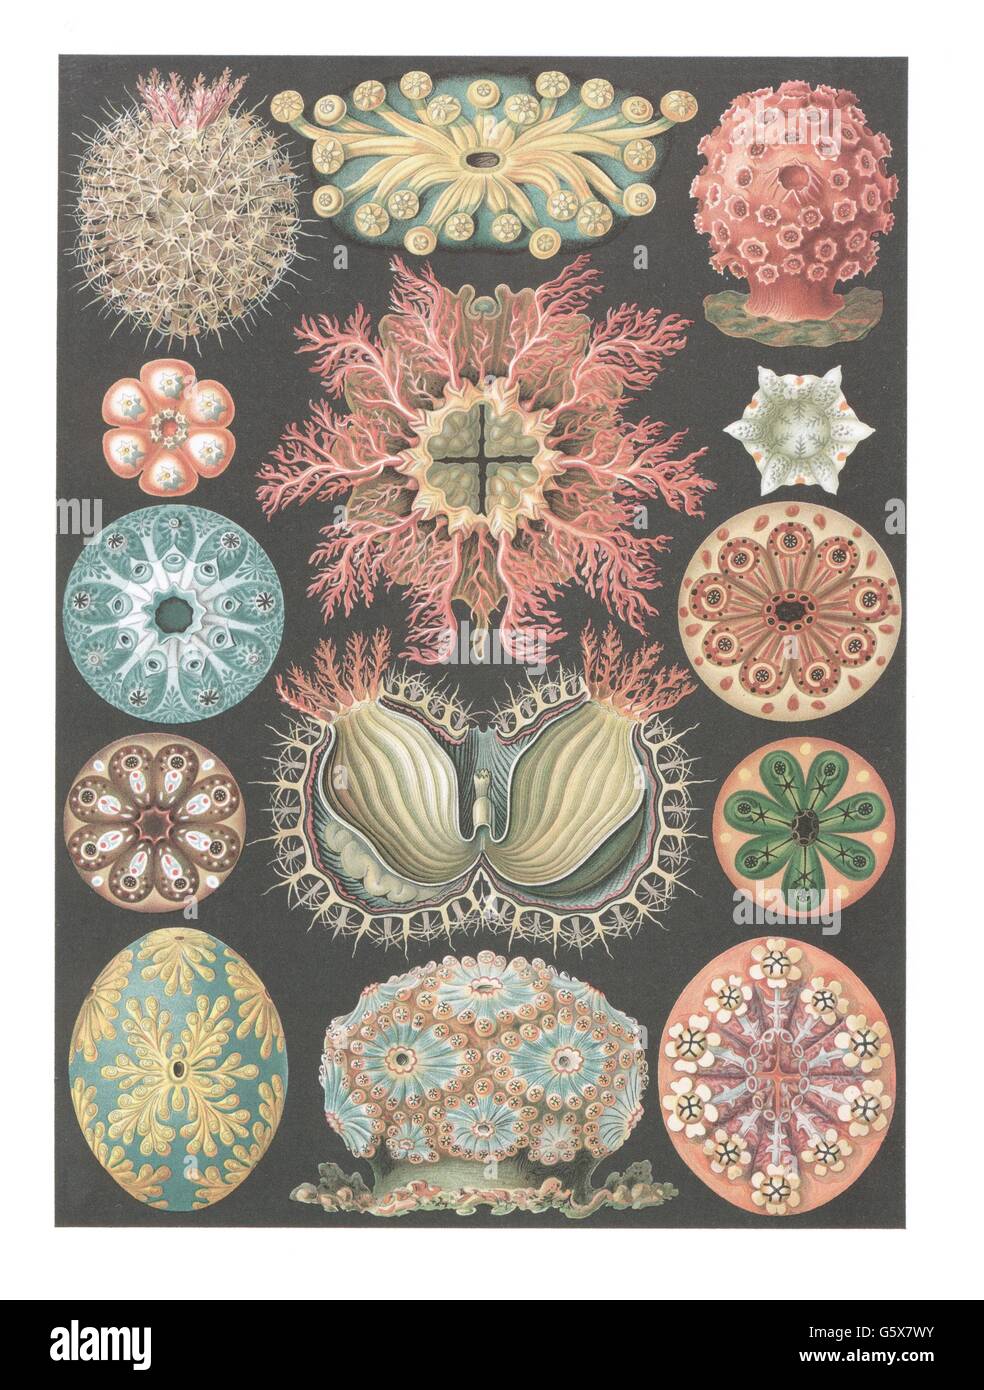 zoologie / Tiere, Tunikate, Meerespröcke (Ascidiae), Farblithographie, aus: Ernst Haeckel, 'Kunstformen der Natur', Leipzig - Wien, 1899 - 1904, Additional-Rights-Clearences-not available Stockfoto